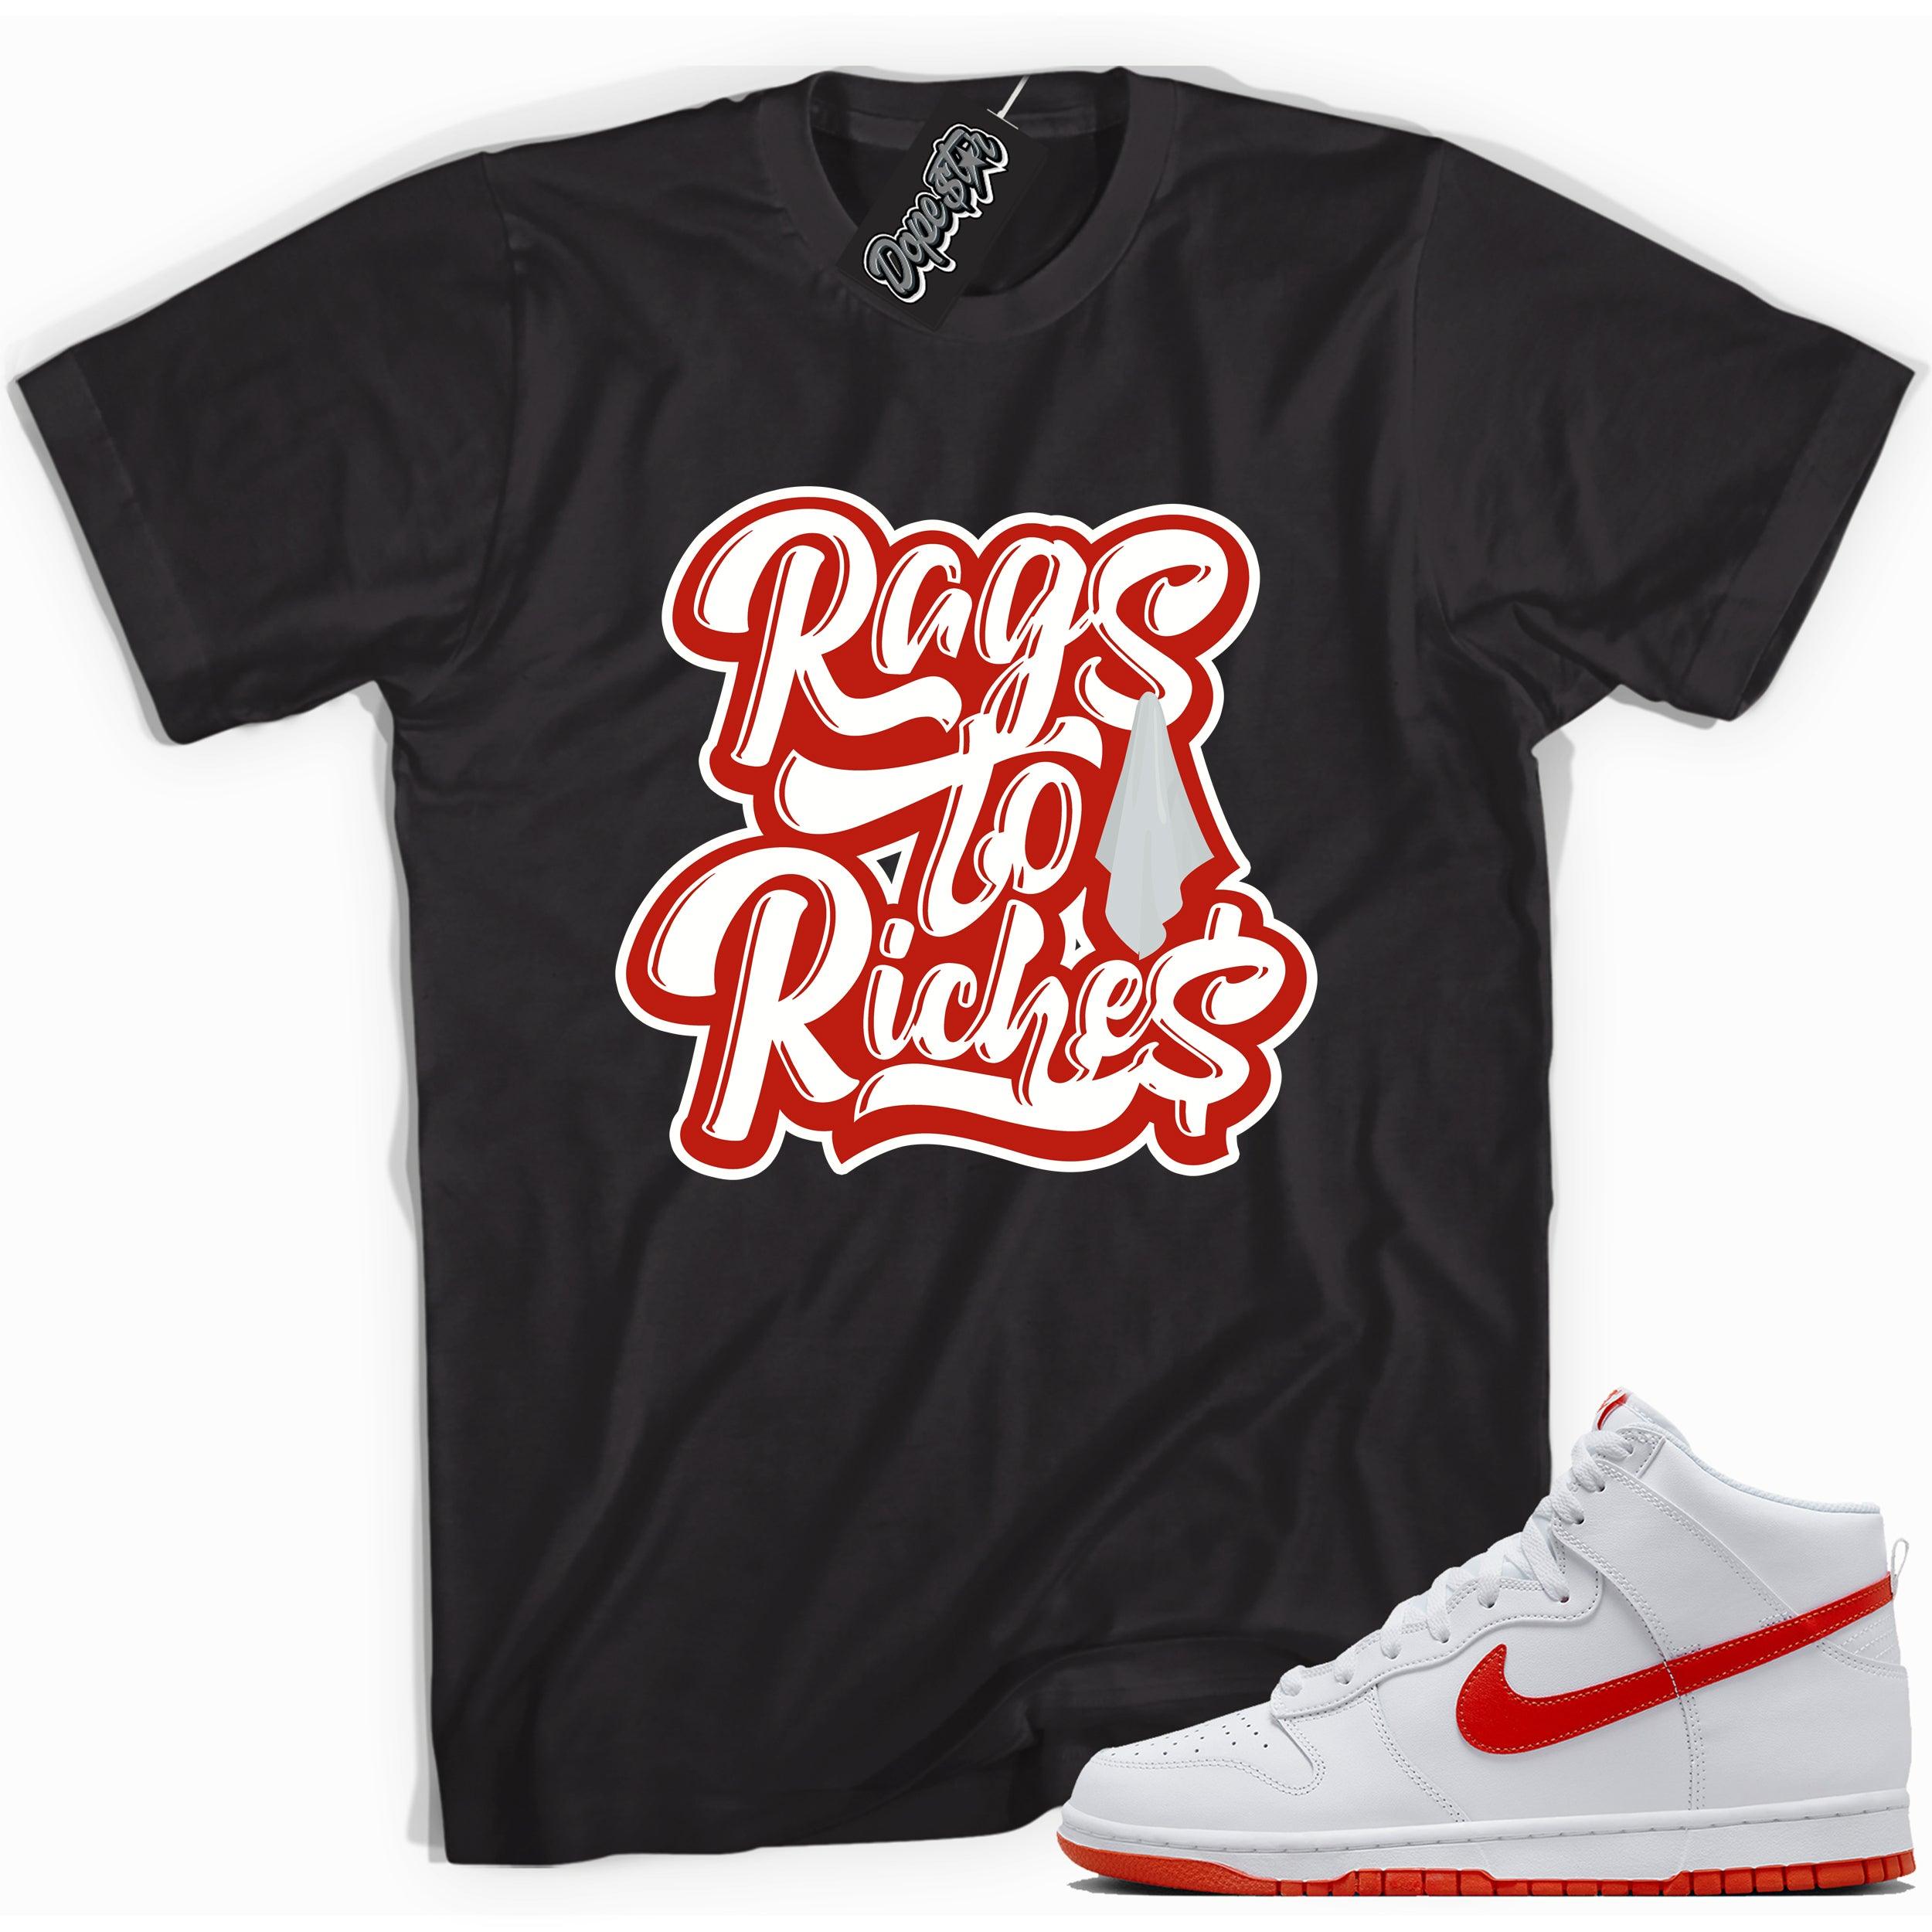 Cool black graphic tee with 'rags to riches' print, that perfectly matches Nike Dunk High White Picante Red sneakers.